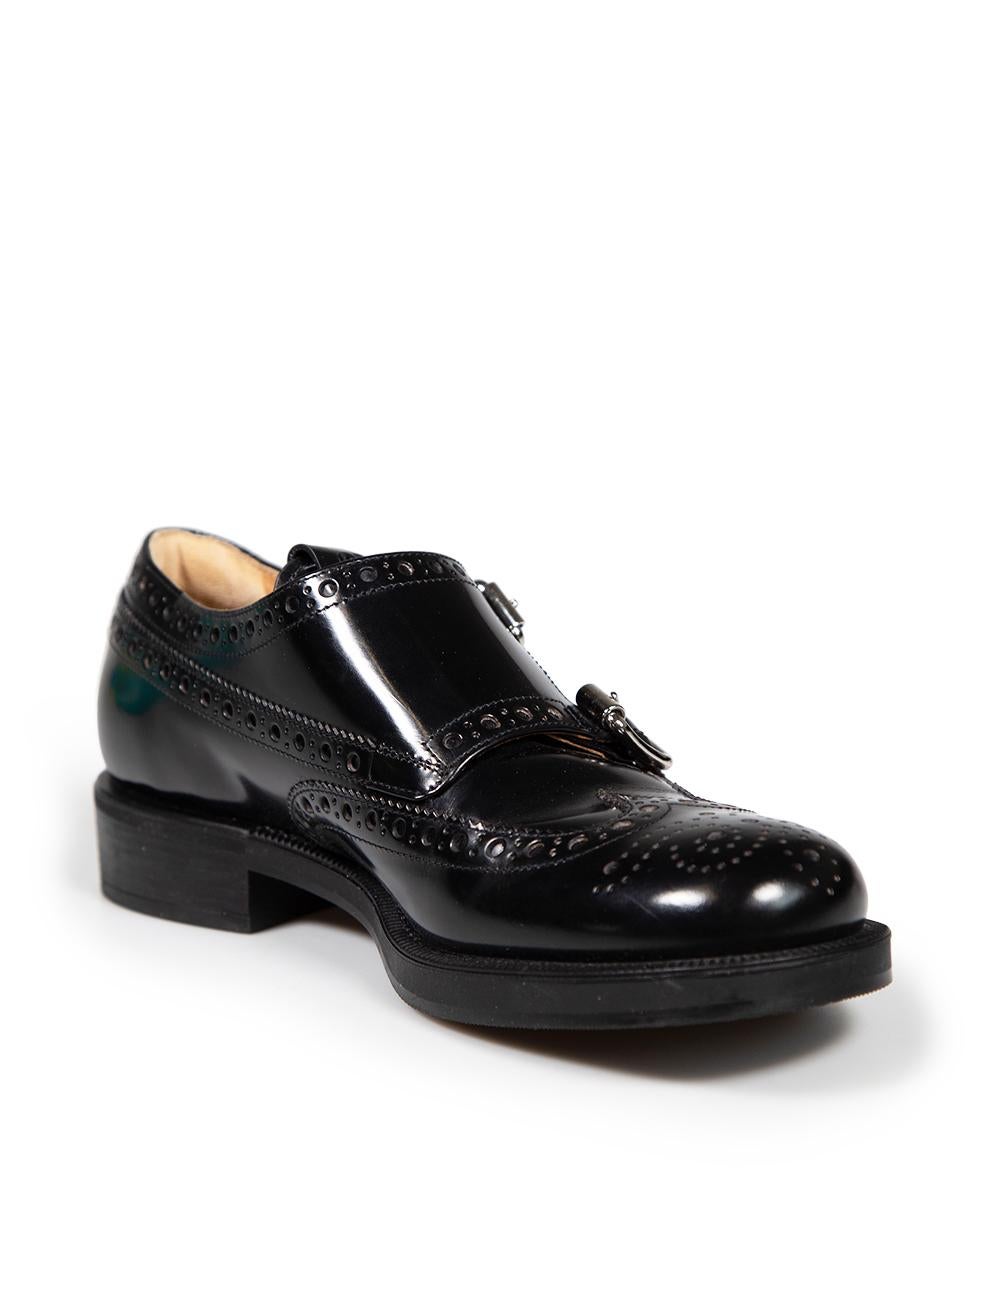 CONDITION is Very good. Minimal wear to Brogues is evident. Minimal scratches to the front and back of the shoes on this used Miu Miu x Church's designer resale item.
 
 
 
 Details
 
 
 Miu Miu x Church's
 
 Black
 
 Leather
 
 Brogues
 
 Round